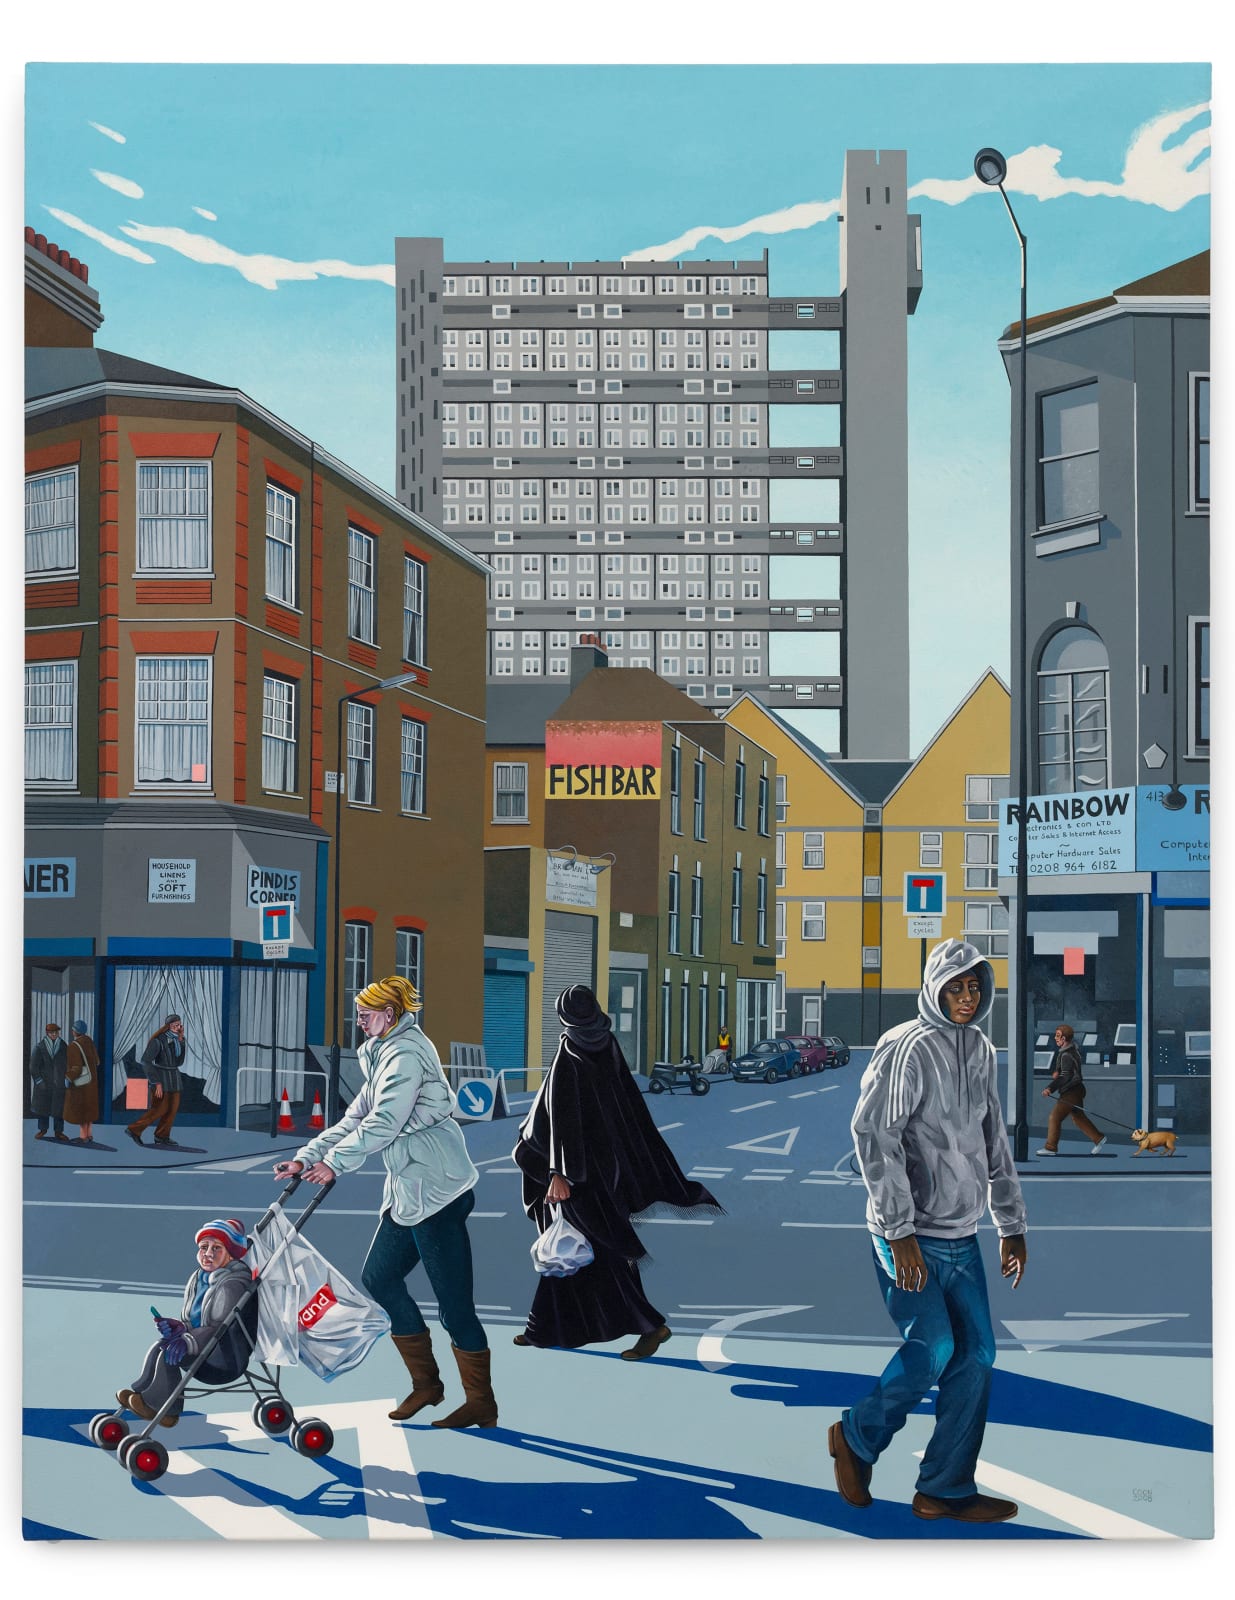 <div class="artist">Caroline Coon</div><div class="title_and_year"><span class="title">Early Morning, Harrow Road</span><span class="year">, 2008</span></div>